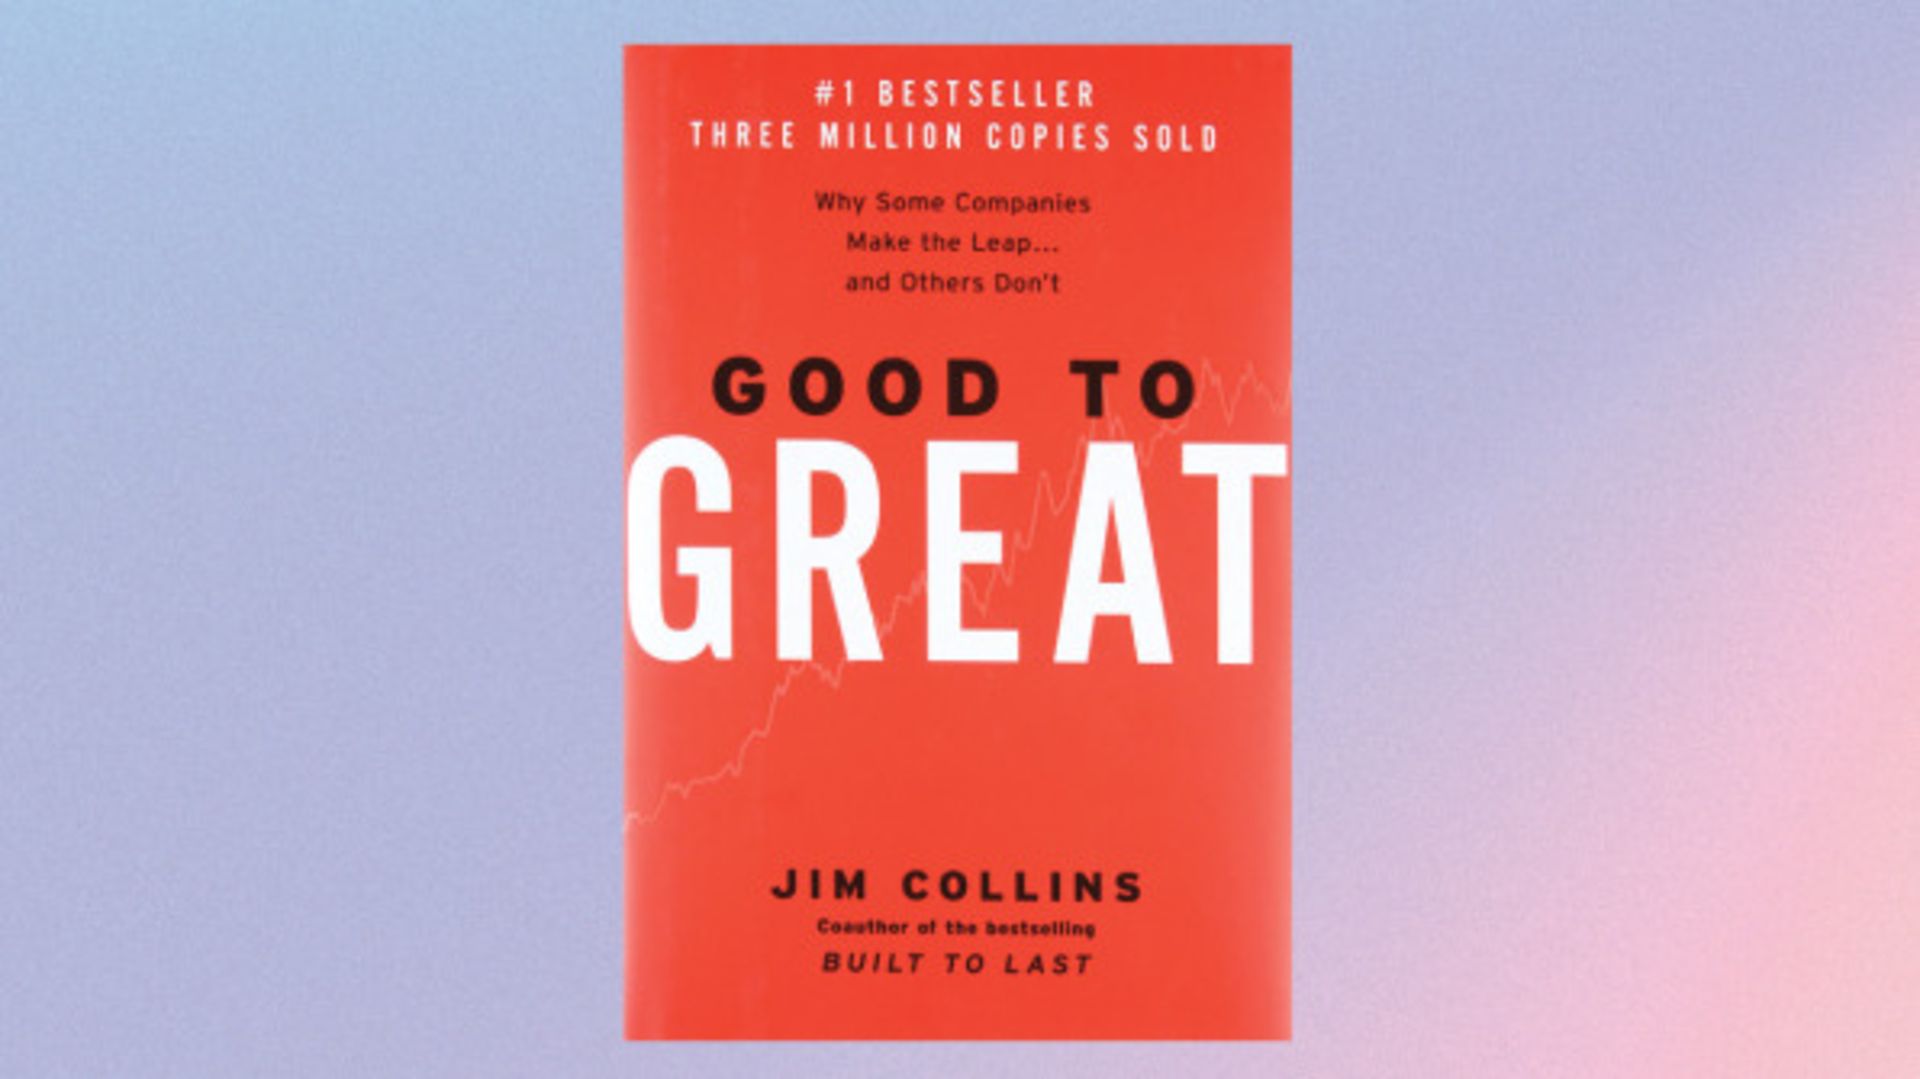 GOOD TO GREAT: WHY SOME COMPANIES MAKE THE LEAP AND OTHERS DON’T BY JIM COLLINS